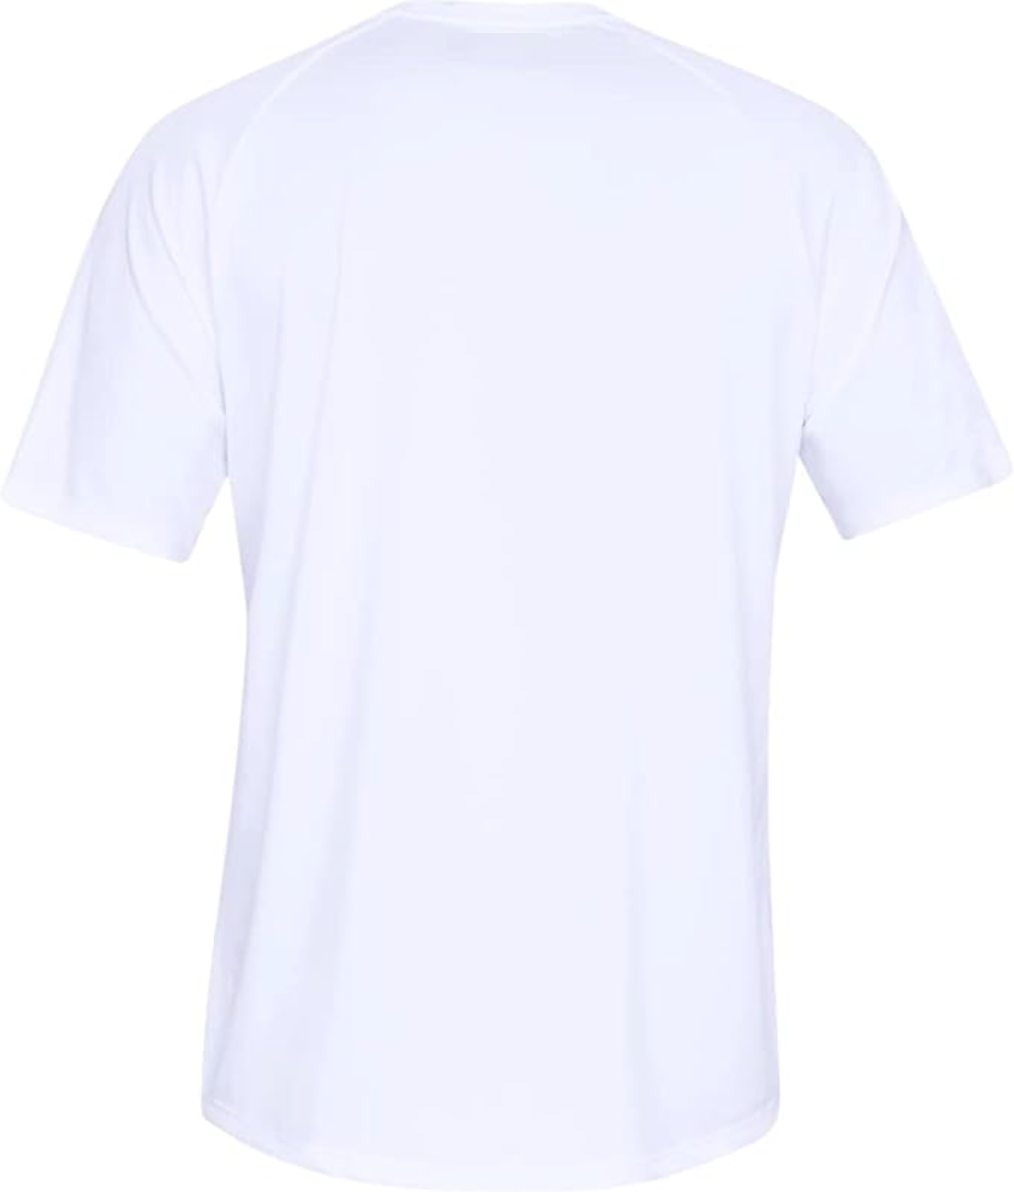 ISMM Sports Breathable Tee White